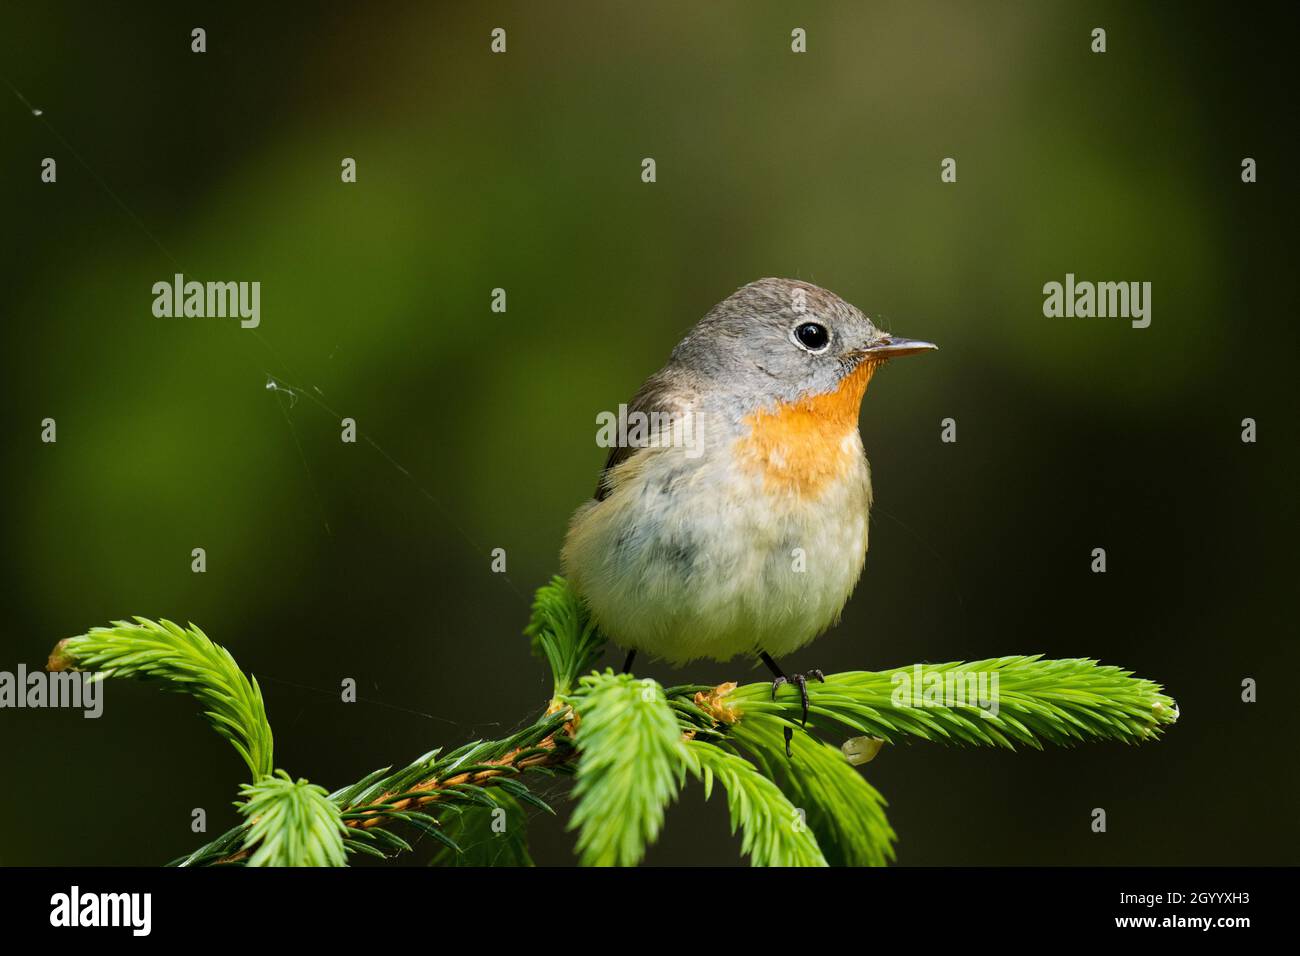 Close-up of an adult male Red-breasted flycatcher, Ficedula parva in an old-growth boreal forest in Estonia, Northern Europe. Stock Photo